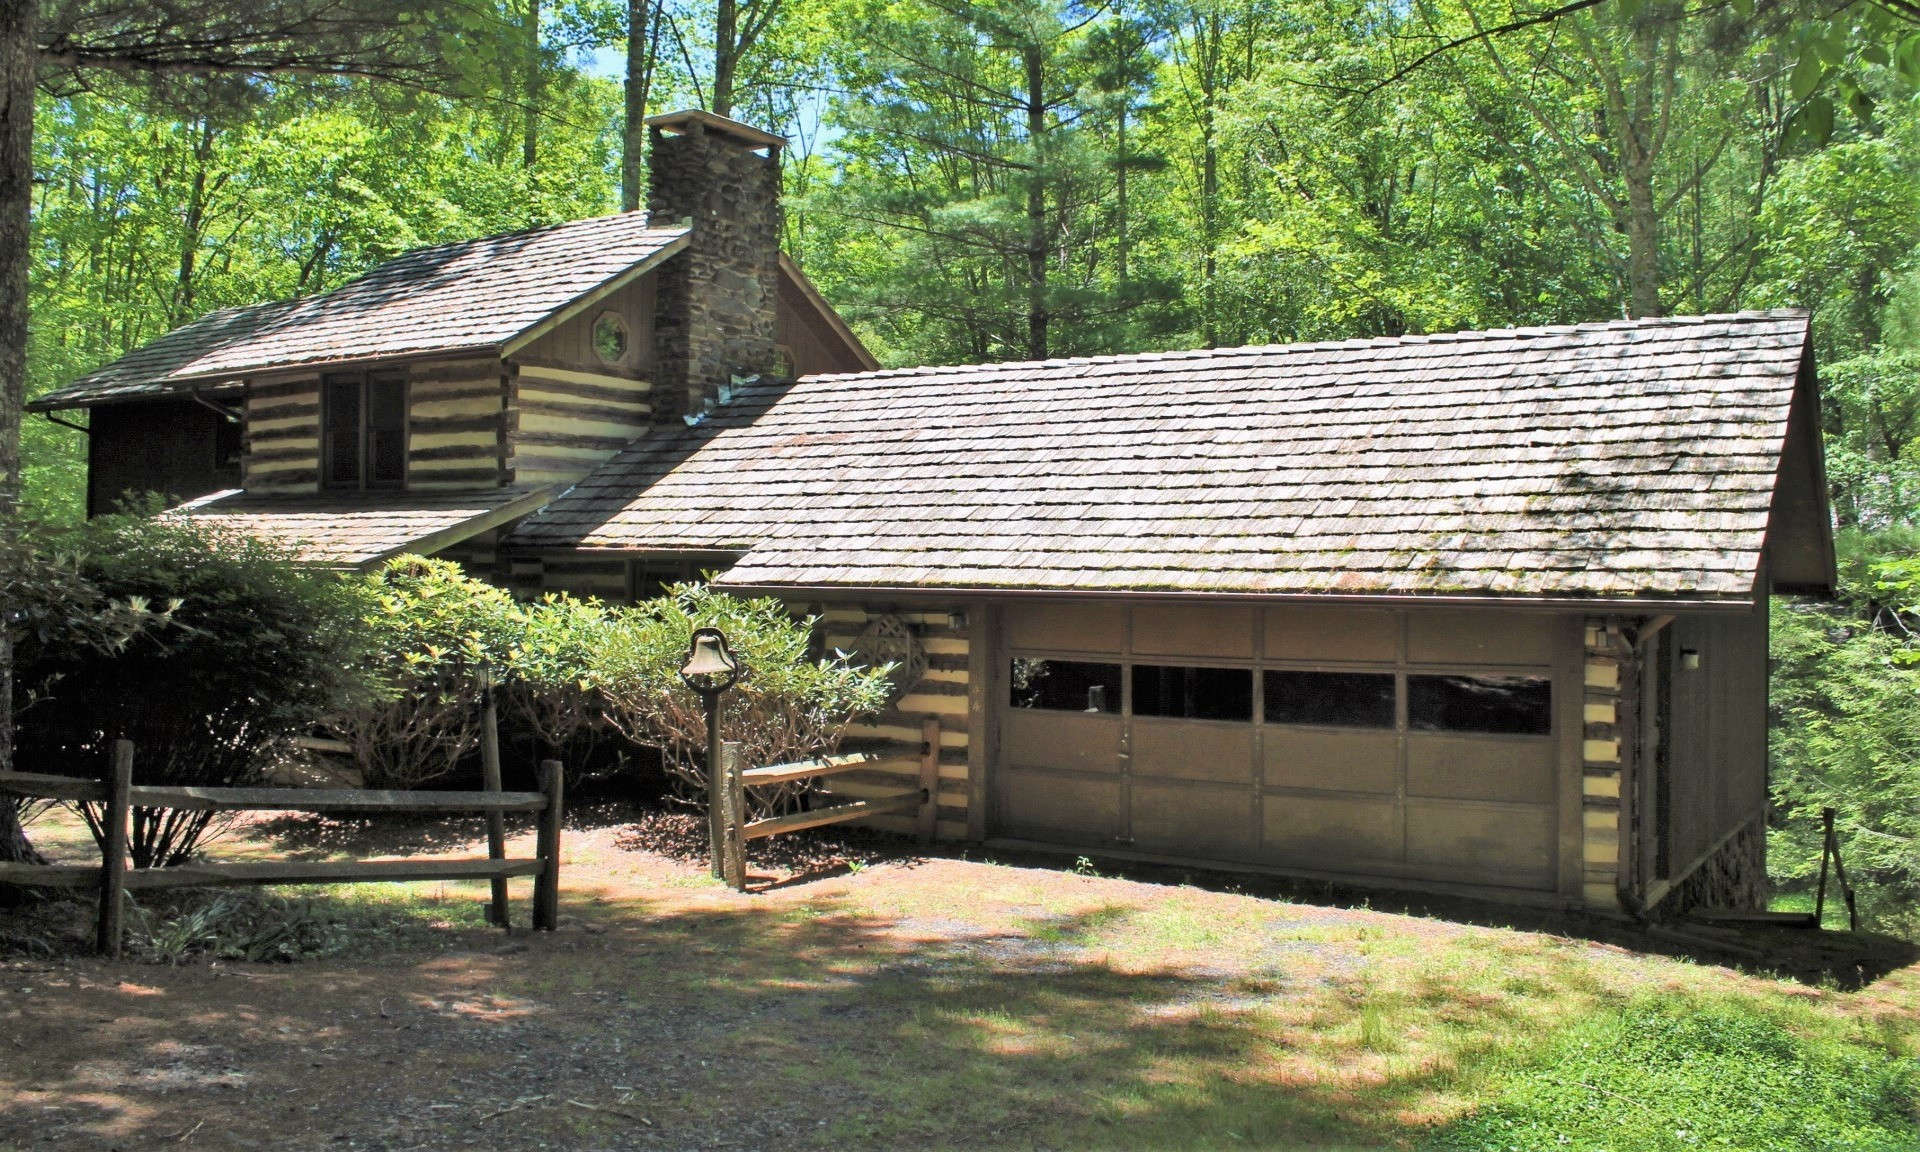 This charming antique-styled log cabin with 3 bedrooms, 2 baths and an attached 2 car garage situated in a park-like setting with bold rushing creek is located in the Stonebridge community, a highly sought after rustic log home community in the Todd area of Southern Ashe County.